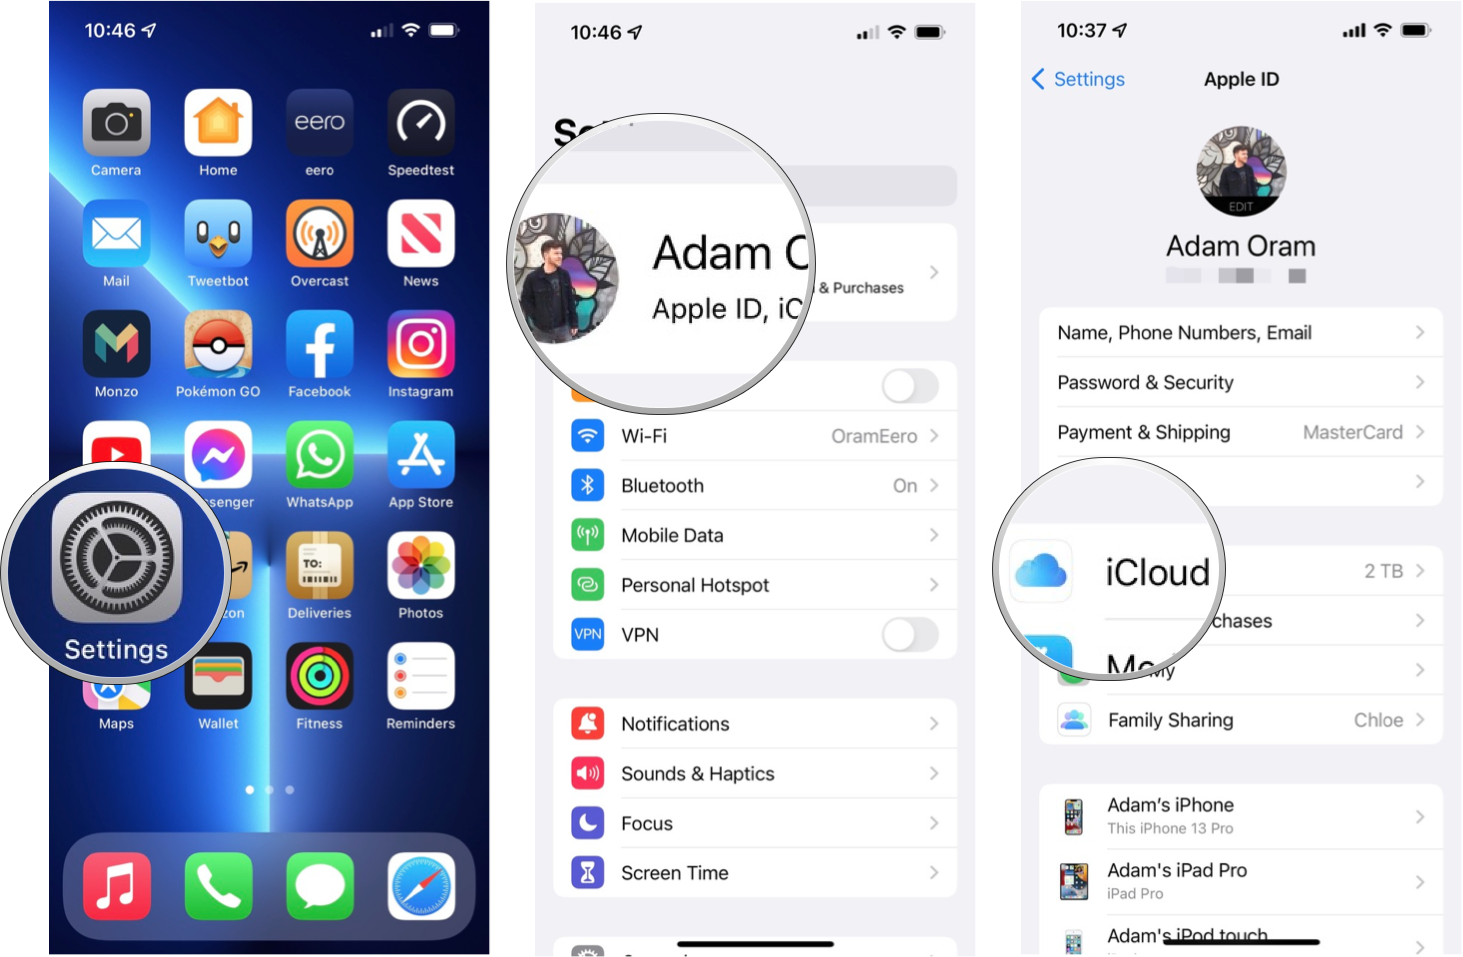 How to turn off Hide My Email forwarding: Open Settings, tap your name, tap iCloud